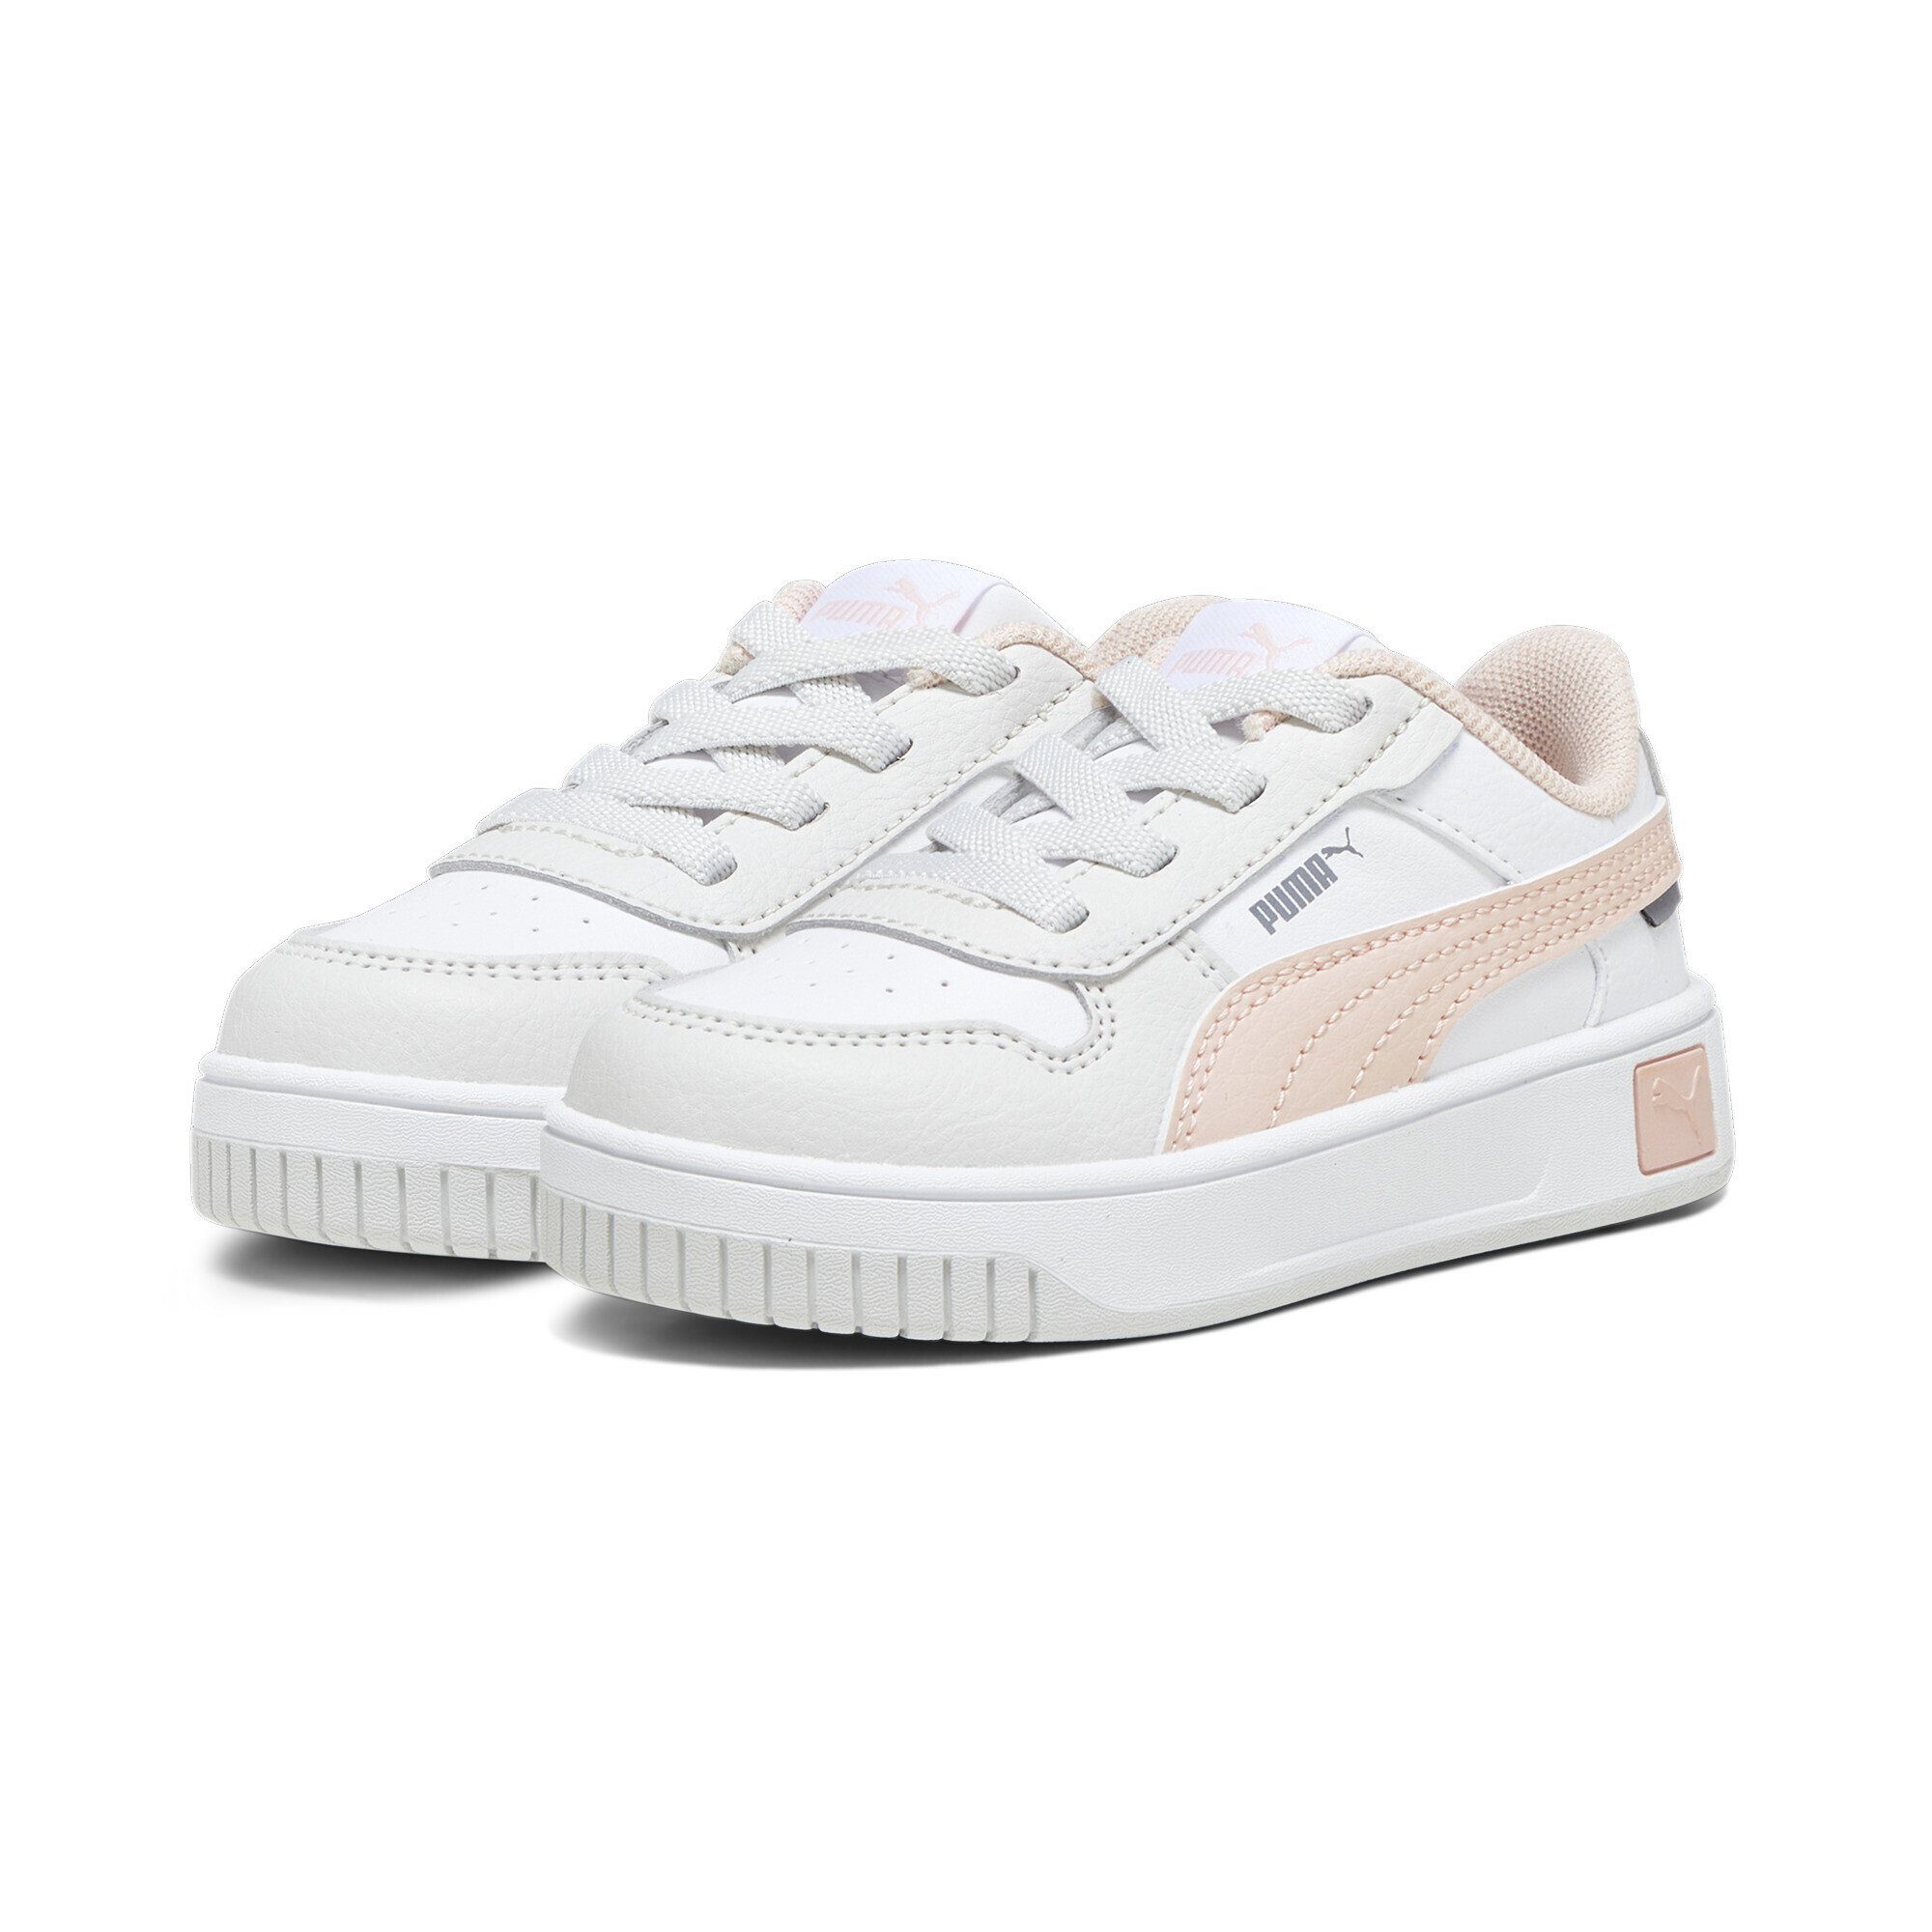 Letzte Preissenkung PUMA Carina Street Sneaker Pink Mädchen Rose Feather White Dust Gray Sneakers